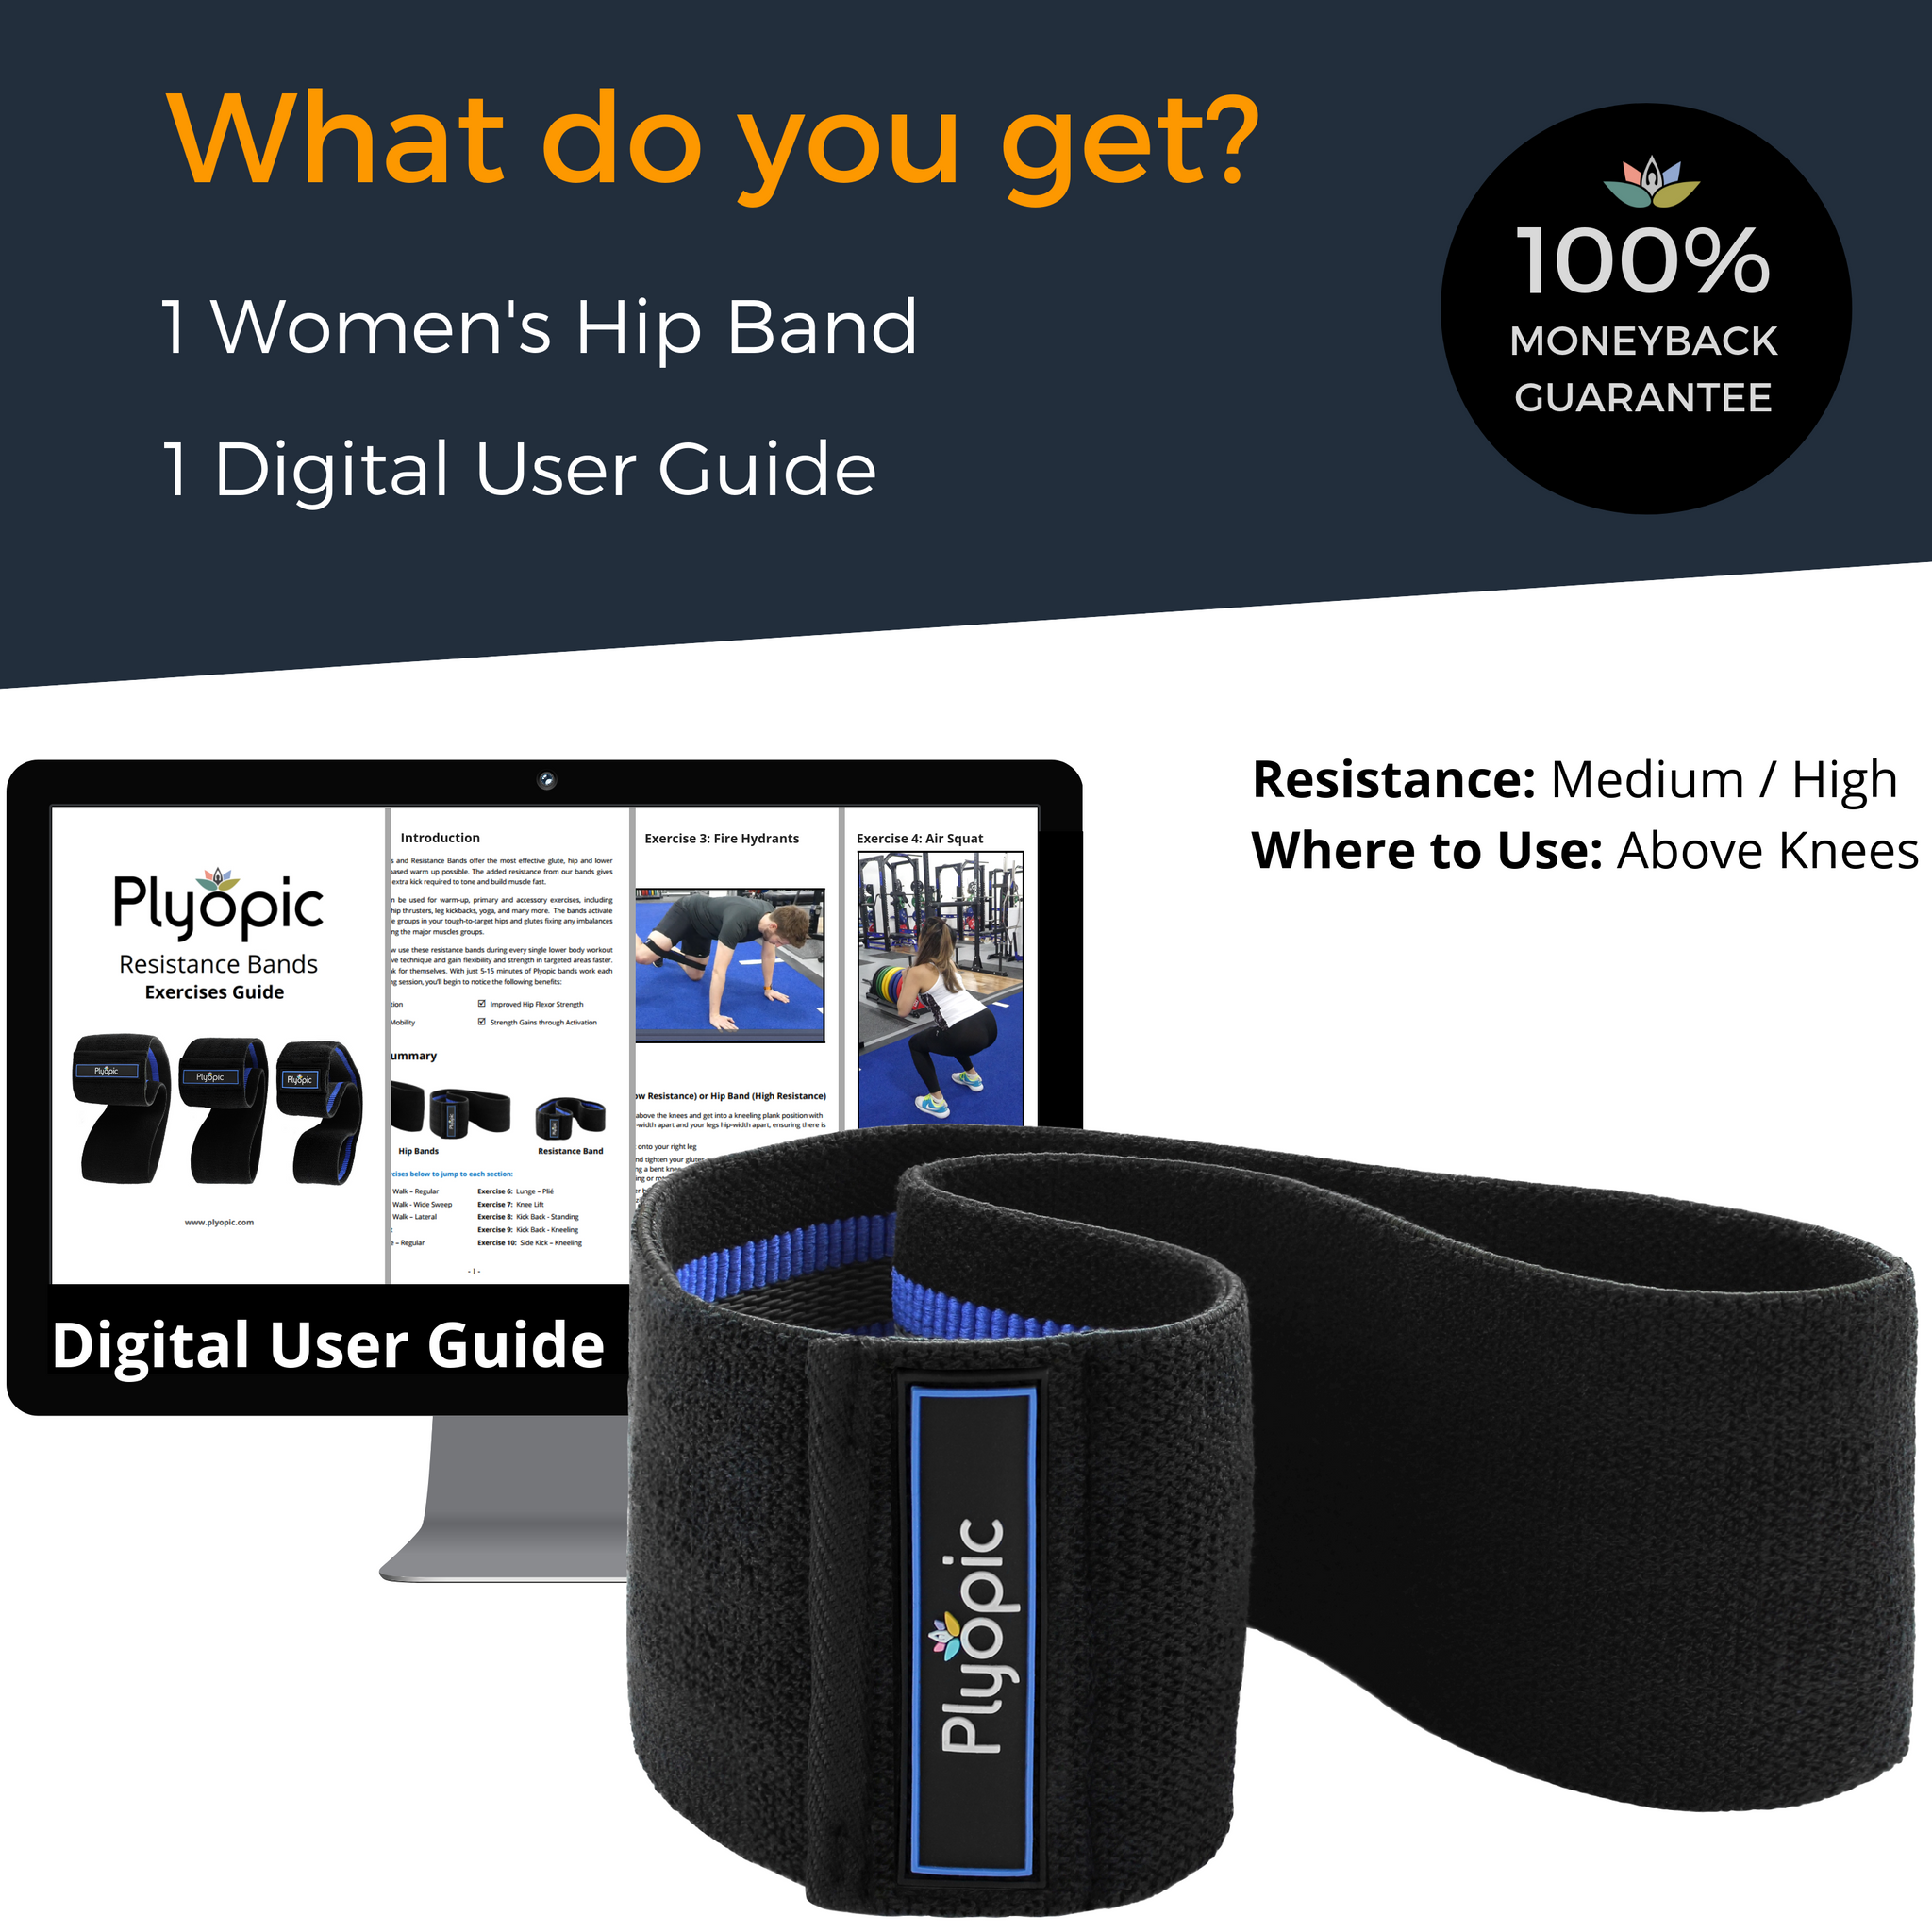 Plyopic-Women's Hip Band (For Upper Legs)-Hip Resistance Band Digital User Guide